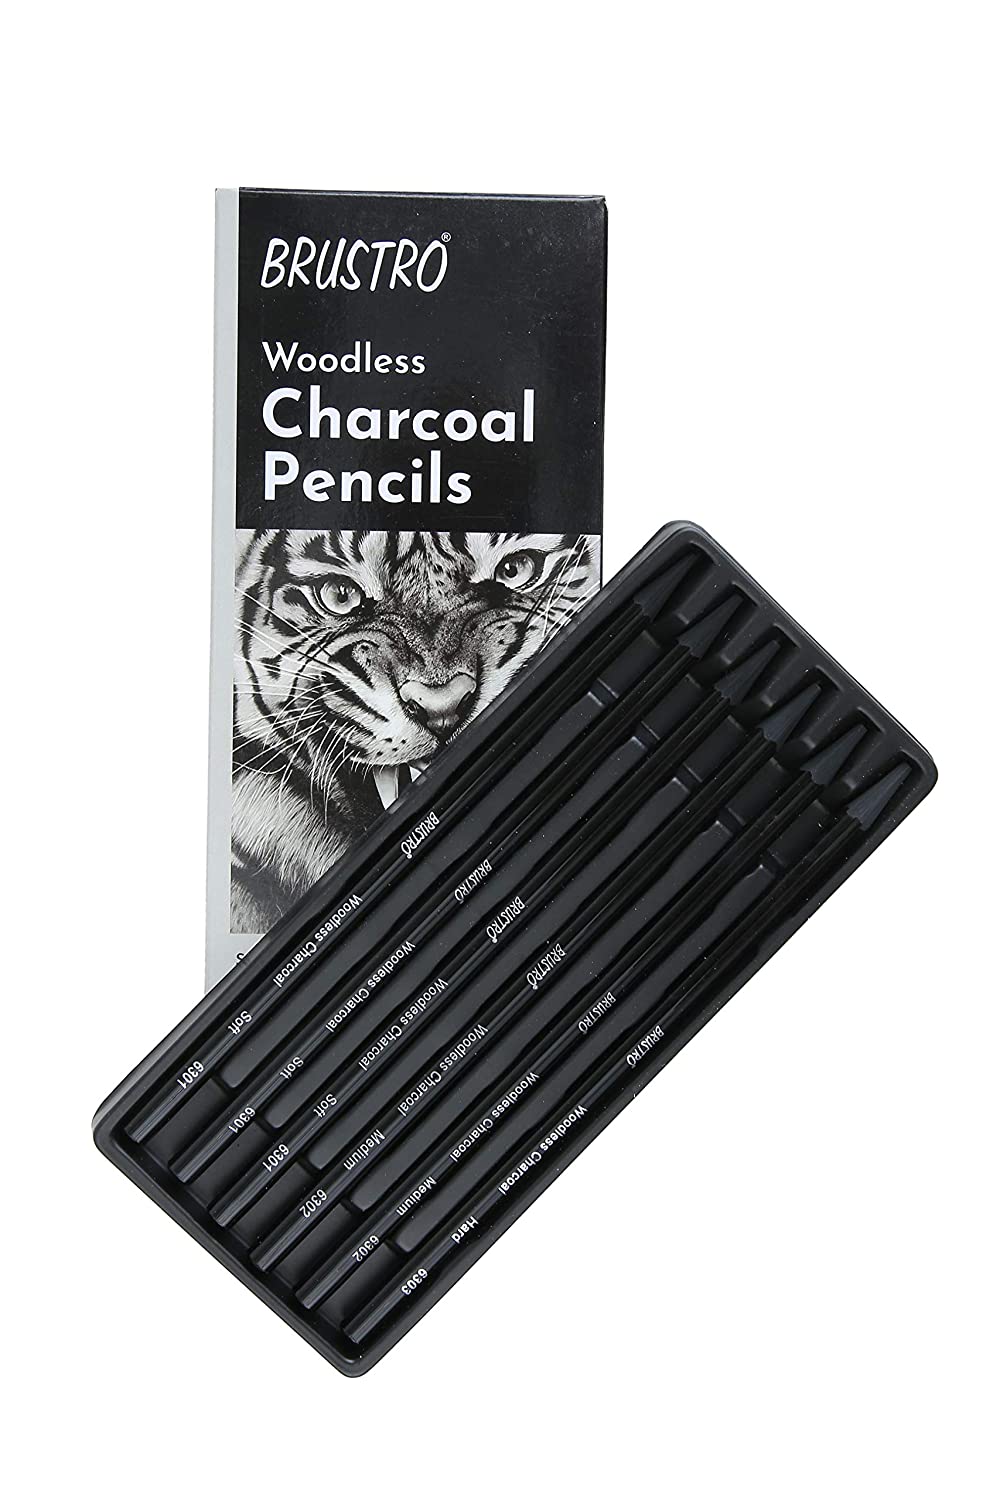 Brustro Slim Battery Operated Eraser + Woodless Charcoal Pencil + A5 Drawing Paper (32+8 Sheets)